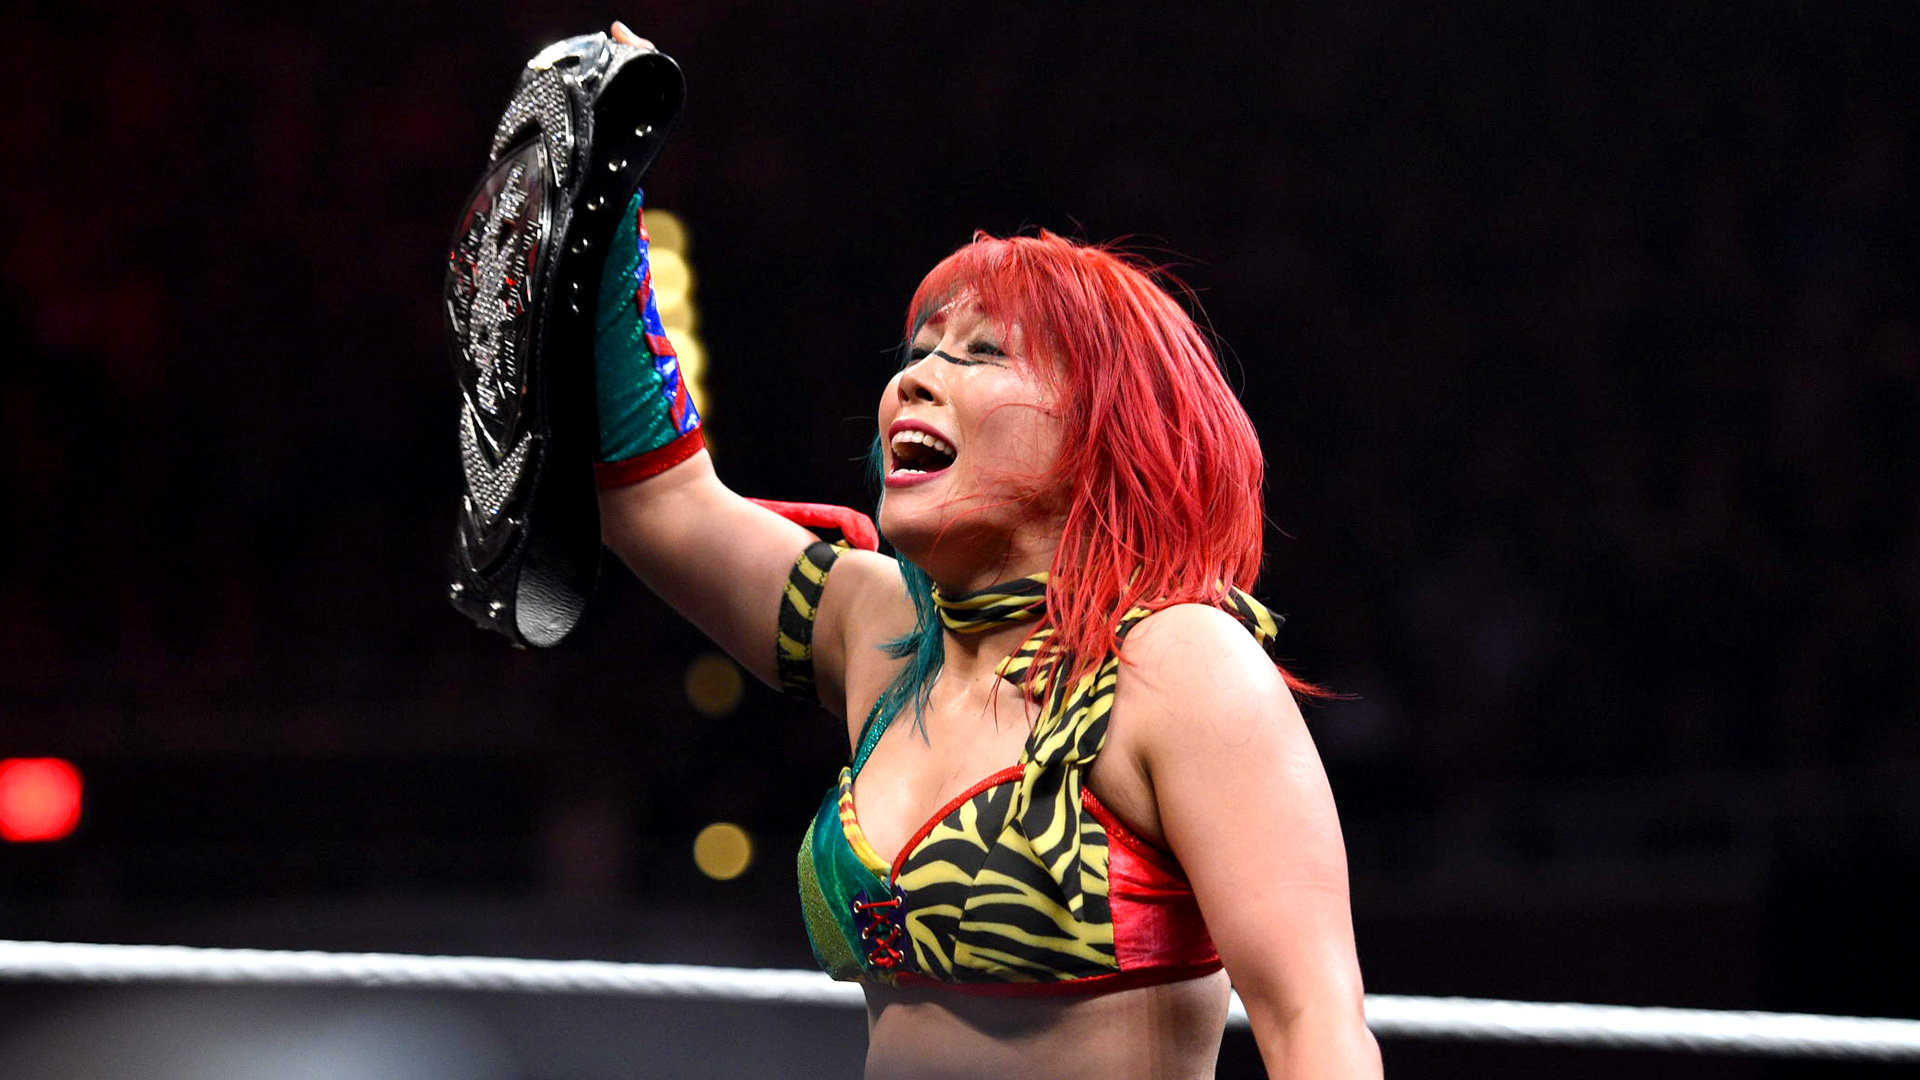 1920x1080 Asuka def. NXT Women's Champion Bayley | WWE Forums - Wrestling Forum And  News